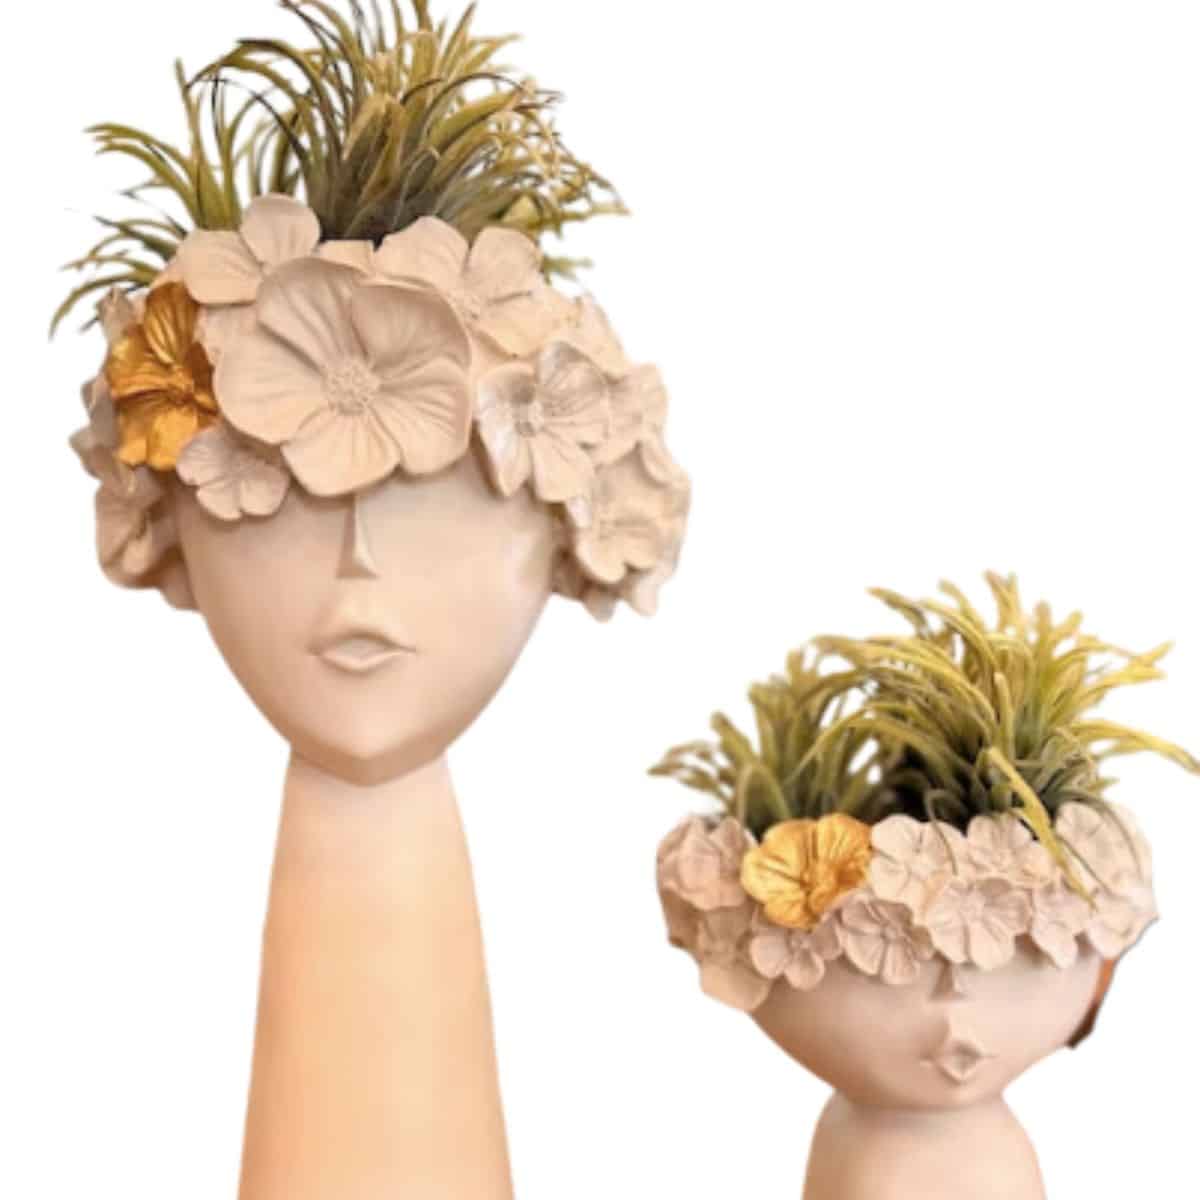 Two Flower Crown Head Planter from Etsy.